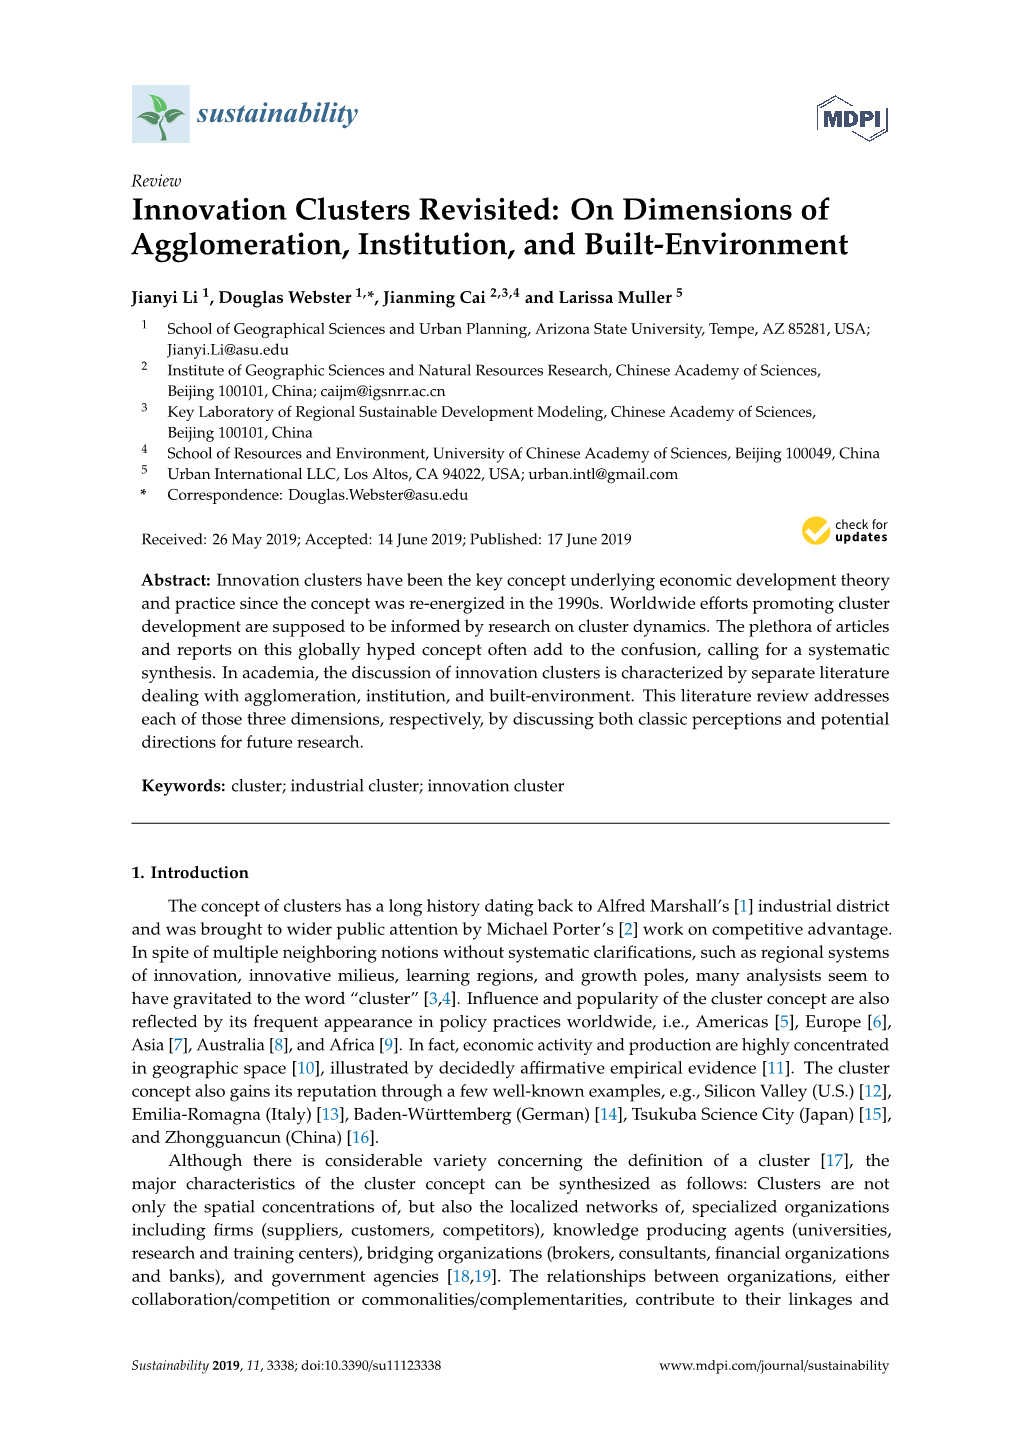 Innovation Clusters Revisited: on Dimensions of Agglomeration, Institution, and Built-Environment